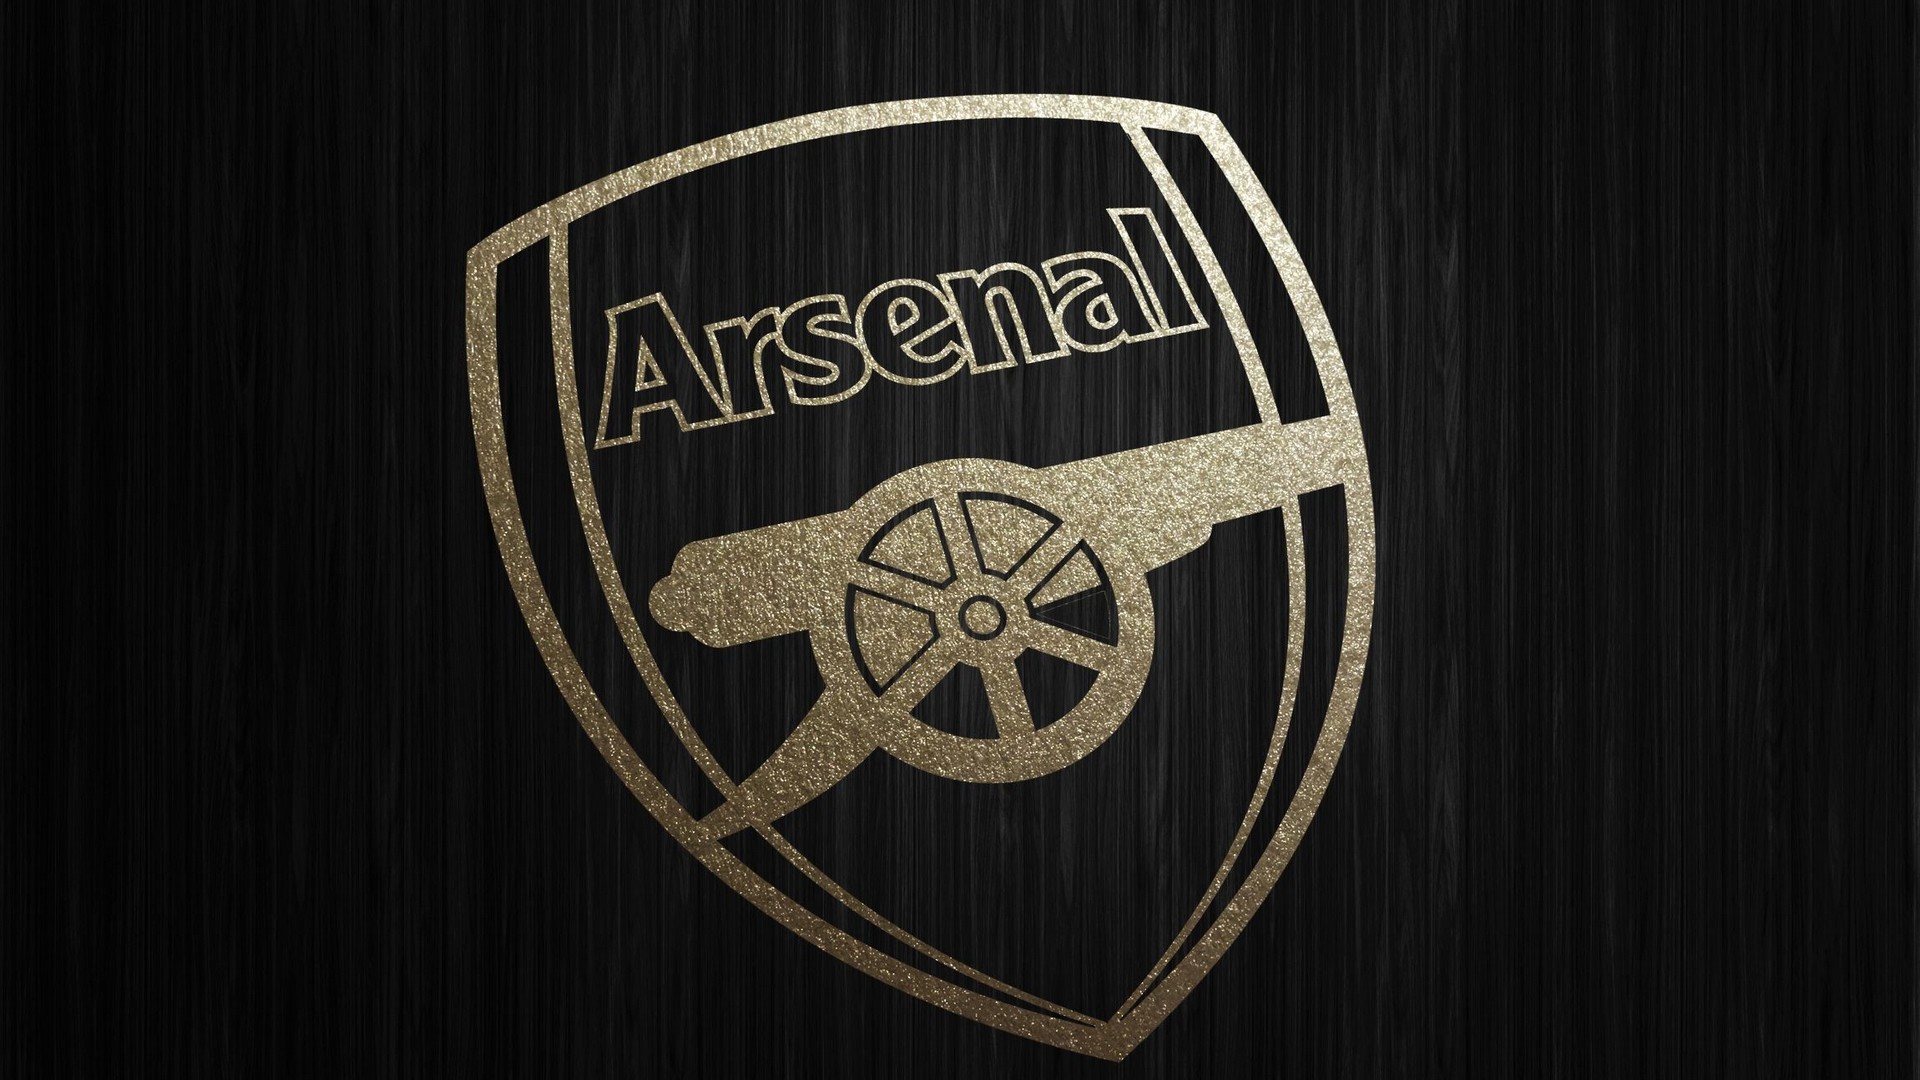 Arsenal FC HD Wallpapers With Resolution 1920X1080 pixel. You can make this wallpaper for your Mac or Windows Desktop Background, iPhone, Android or Tablet and another Smartphone device for free